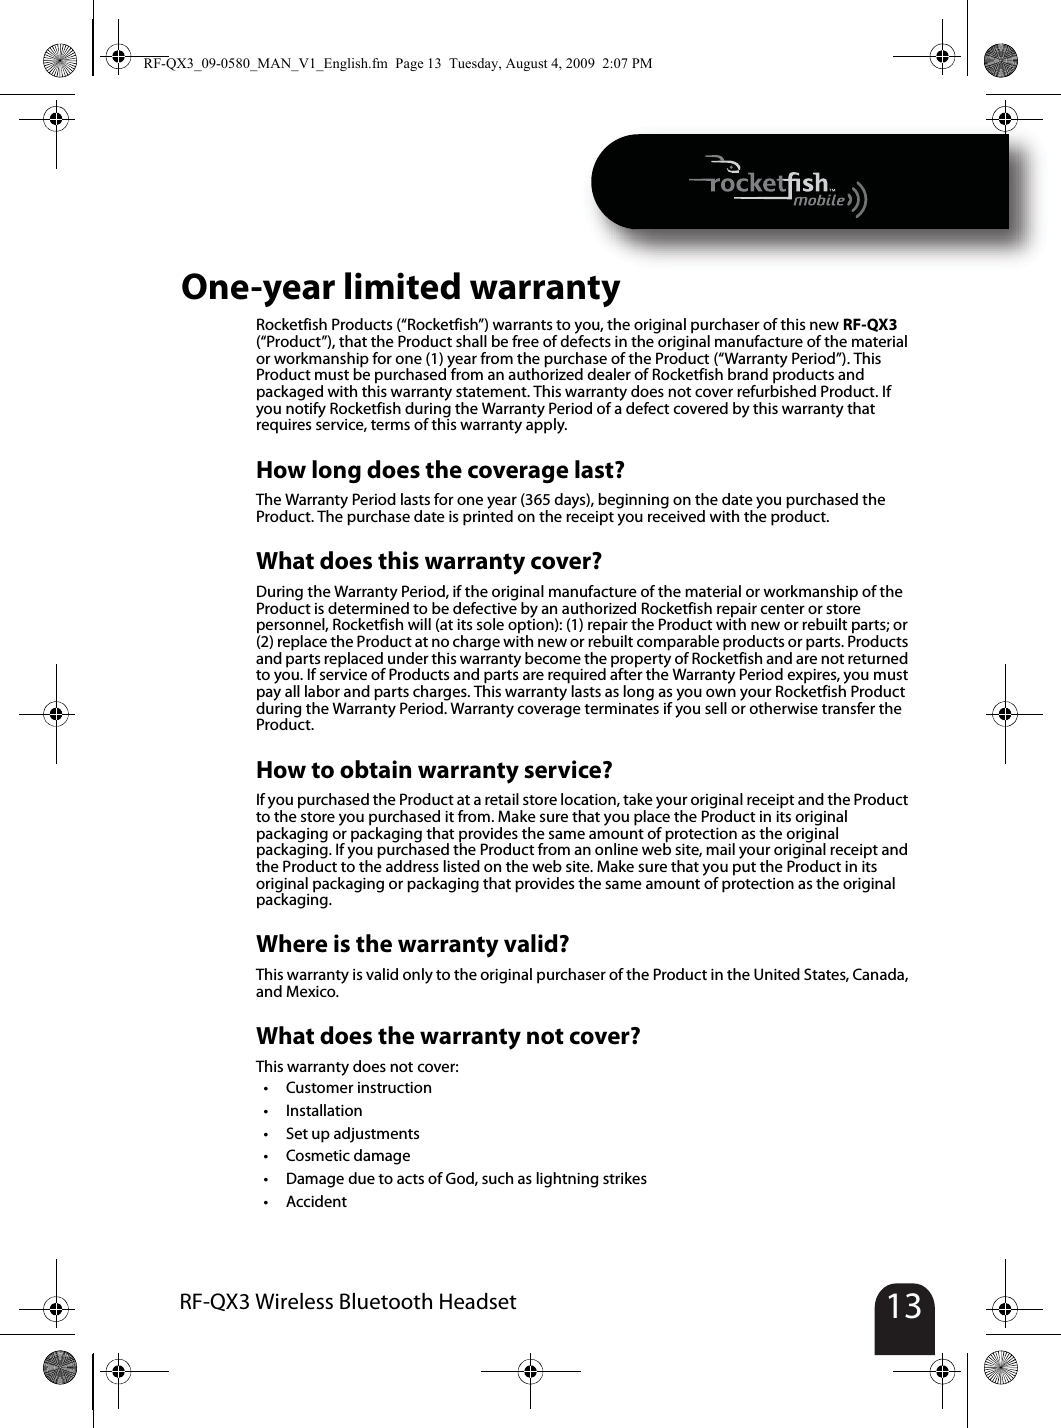 13RF-QX3 Wireless Bluetooth HeadsetOne-year limited warrantyRocketfish Products (“Rocketfish”) warrants to you, the original purchaser of this new RF-QX3 (“Product”), that the Product shall be free of defects in the original manufacture of the material or workmanship for one (1) year from the purchase of the Product (“Warranty Period”). This Product must be purchased from an authorized dealer of Rocketfish brand products and packaged with this warranty statement. This warranty does not cover refurbished Product. If you notify Rocketfish during the Warranty Period of a defect covered by this warranty that requires service, terms of this warranty apply.How long does the coverage last?The Warranty Period lasts for one year (365 days), beginning on the date you purchased the Product. The purchase date is printed on the receipt you received with the product.What does this warranty cover?During the Warranty Period, if the original manufacture of the material or workmanship of the Product is determined to be defective by an authorized Rocketfish repair center or store personnel, Rocketfish will (at its sole option): (1) repair the Product with new or rebuilt parts; or (2) replace the Product at no charge with new or rebuilt comparable products or parts. Products and parts replaced under this warranty become the property of Rocketfish and are not returned to you. If service of Products and parts are required after the Warranty Period expires, you must pay all labor and parts charges. This warranty lasts as long as you own your Rocketfish Product during the Warranty Period. Warranty coverage terminates if you sell or otherwise transfer the Product.How to obtain warranty service?If you purchased the Product at a retail store location, take your original receipt and the Product to the store you purchased it from. Make sure that you place the Product in its original packaging or packaging that provides the same amount of protection as the original packaging. If you purchased the Product from an online web site, mail your original receipt and the Product to the address listed on the web site. Make sure that you put the Product in its original packaging or packaging that provides the same amount of protection as the original packaging.Where is the warranty valid?This warranty is valid only to the original purchaser of the Product in the United States, Canada, and Mexico.What does the warranty not cover?This warranty does not cover:•Customer instruction•Installation•Set up adjustments•Cosmetic damage• Damage due to acts of God, such as lightning strikes•AccidentRF-QX3_09-0580_MAN_V1_English.fm  Page 13  Tuesday, August 4, 2009  2:07 PM